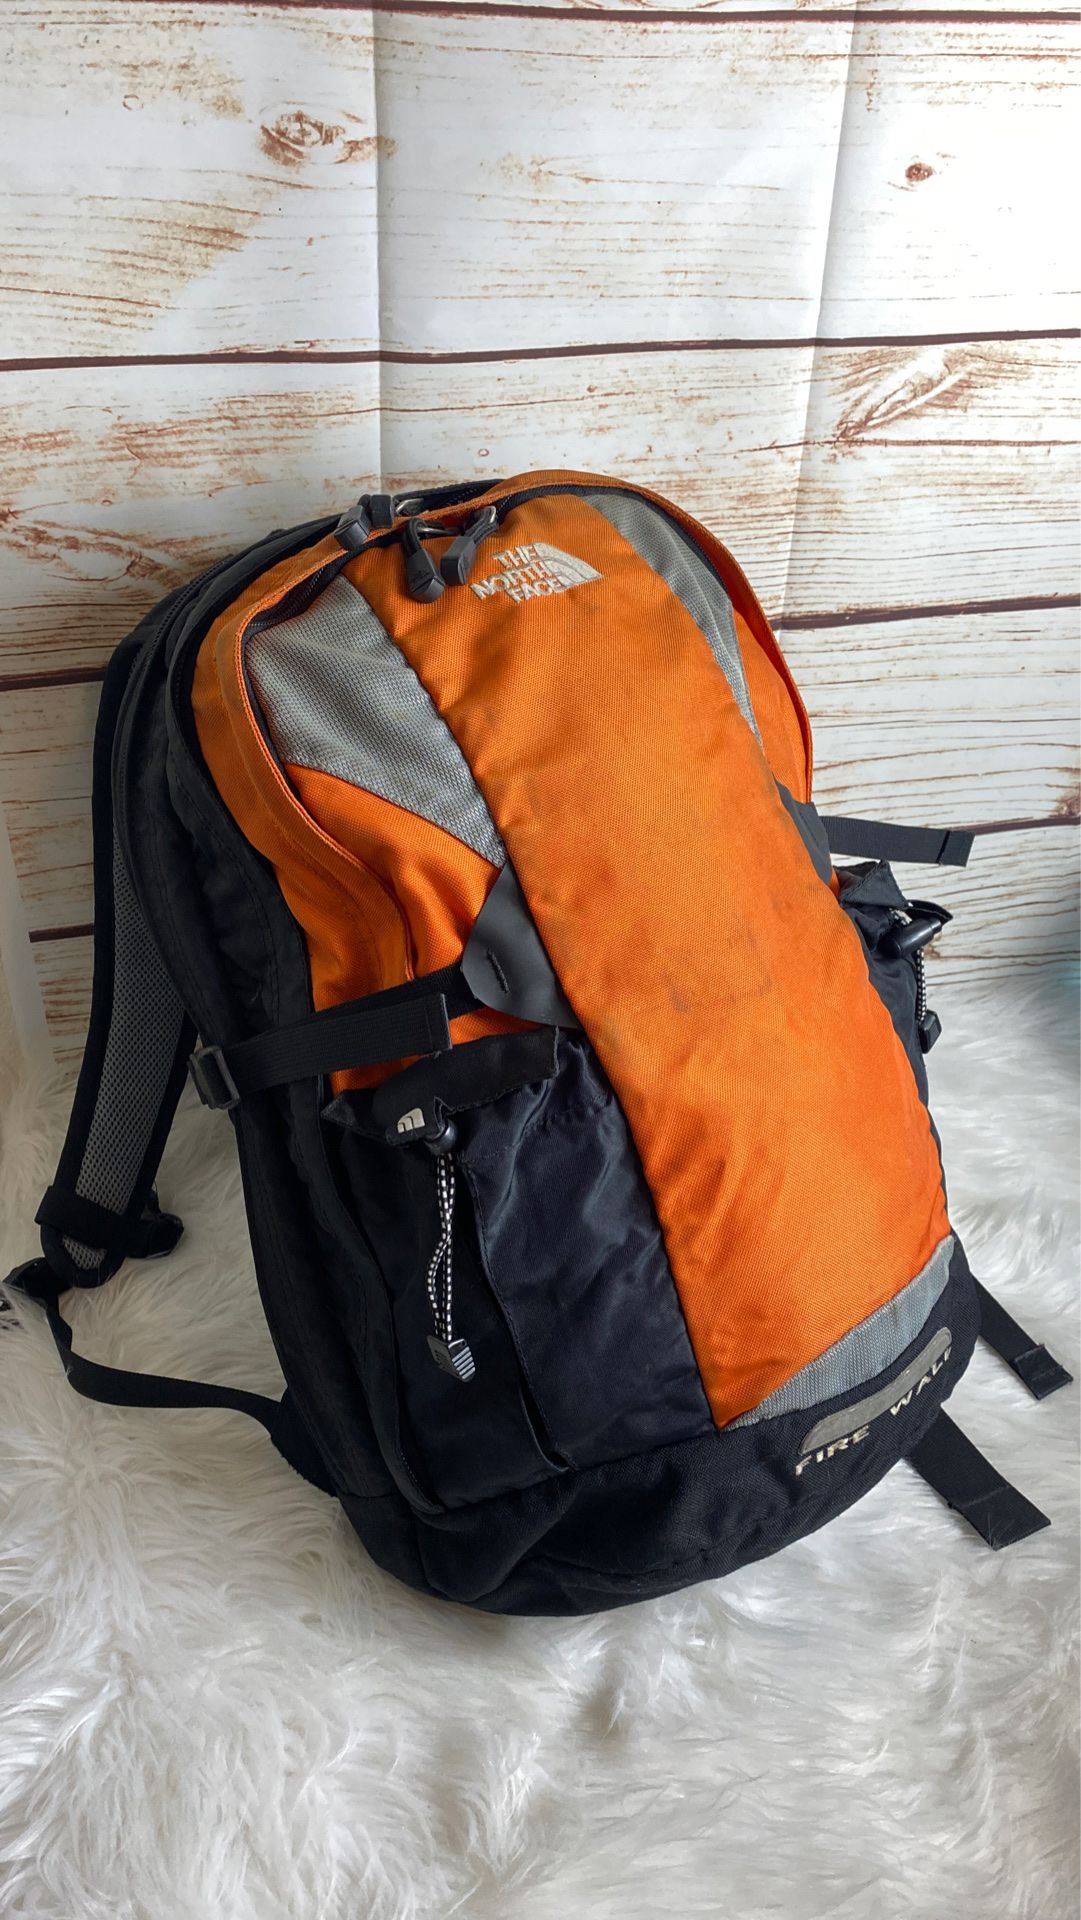 The north face “fire wall” hiking backpack.